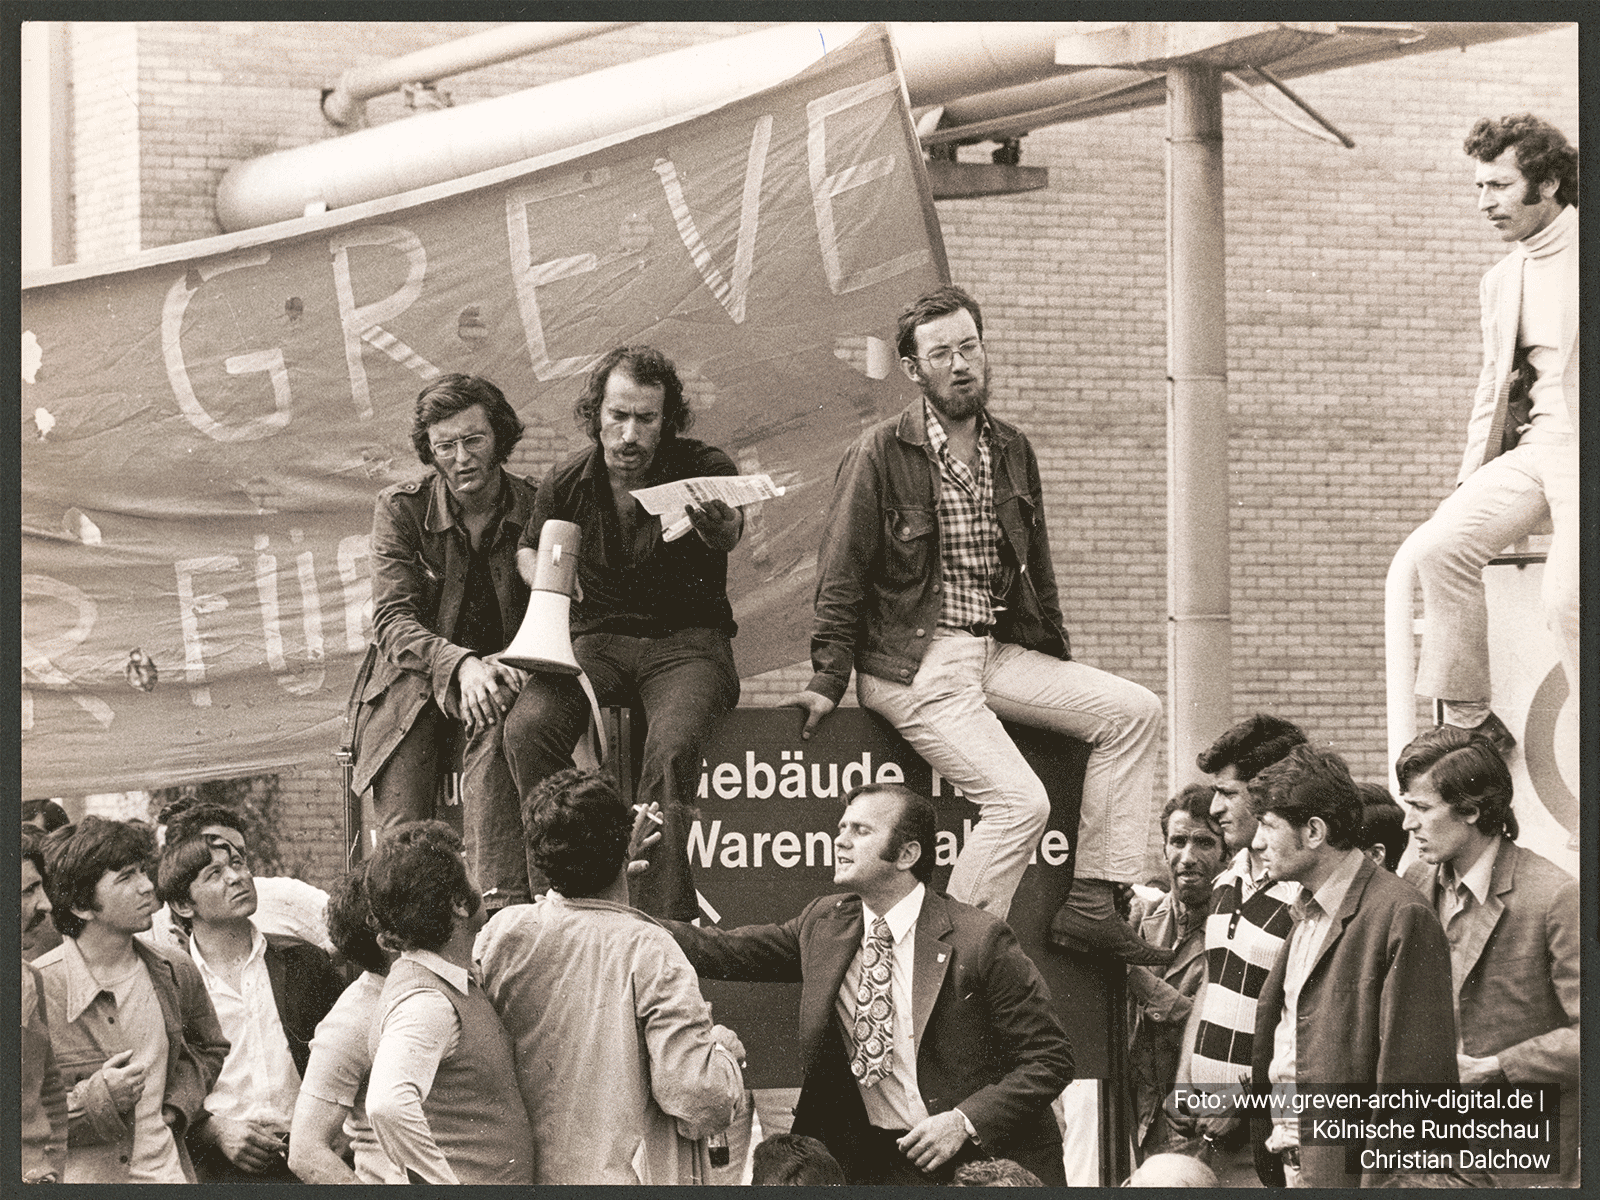 One of the strike leaders, Baha Türgün, with megaphone during the strike at the Ford plants in Cologne-Niehl in August 1973. Photo taken on August 28, 1973.Photo: www.greven-archiv-digital.de | Kölnische Rundschau | Christian Dalchow